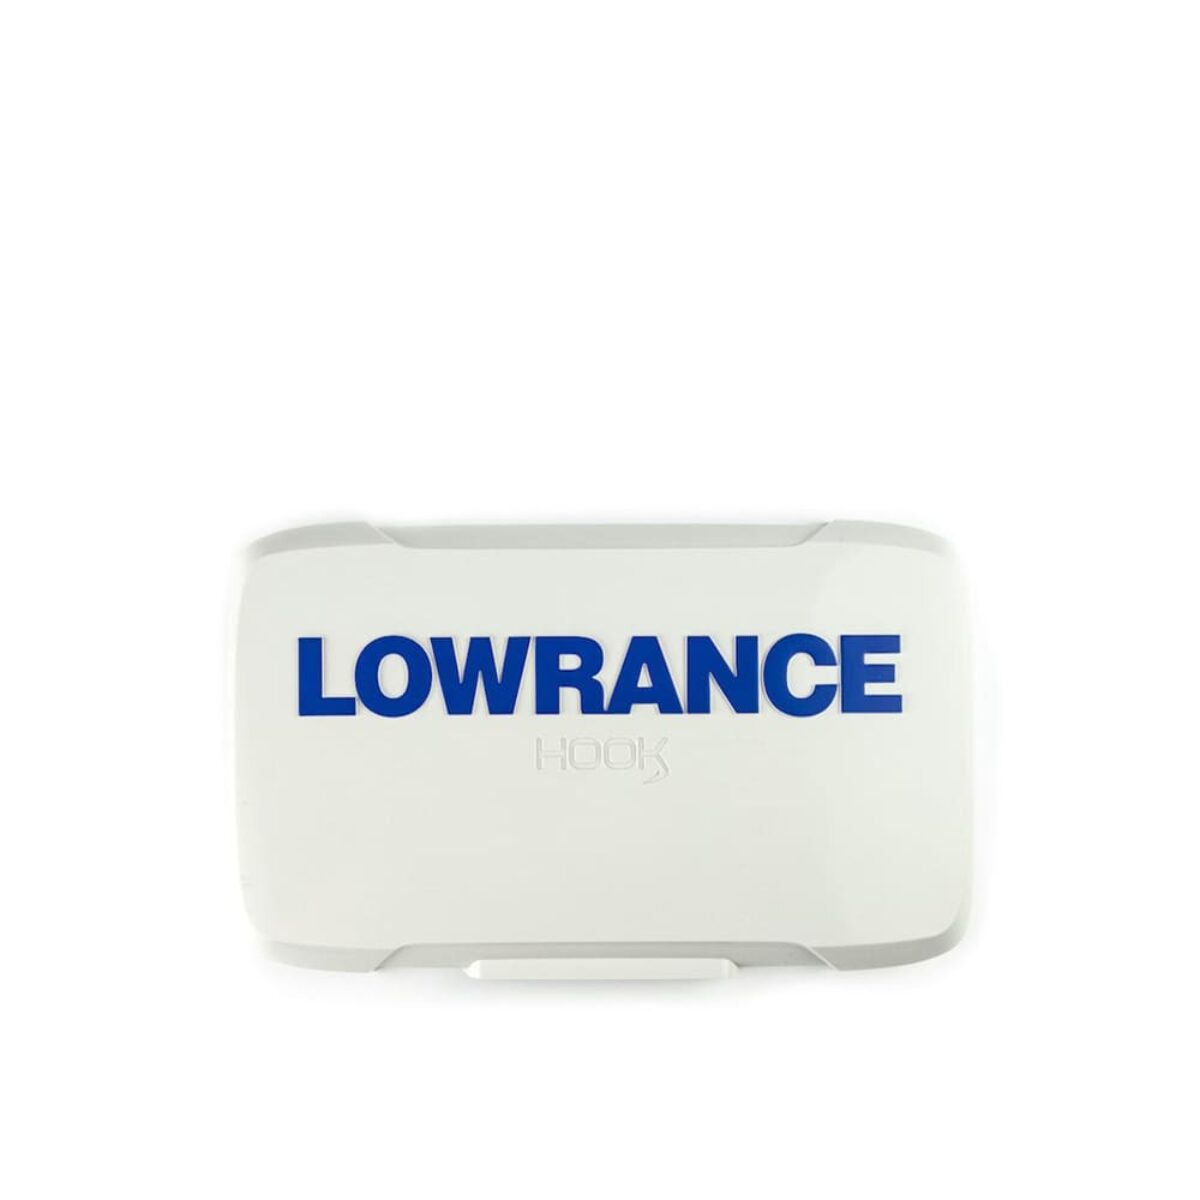 Lowrance HOOK2-5 Suncover (000-14174-001) at GPS Central Canada